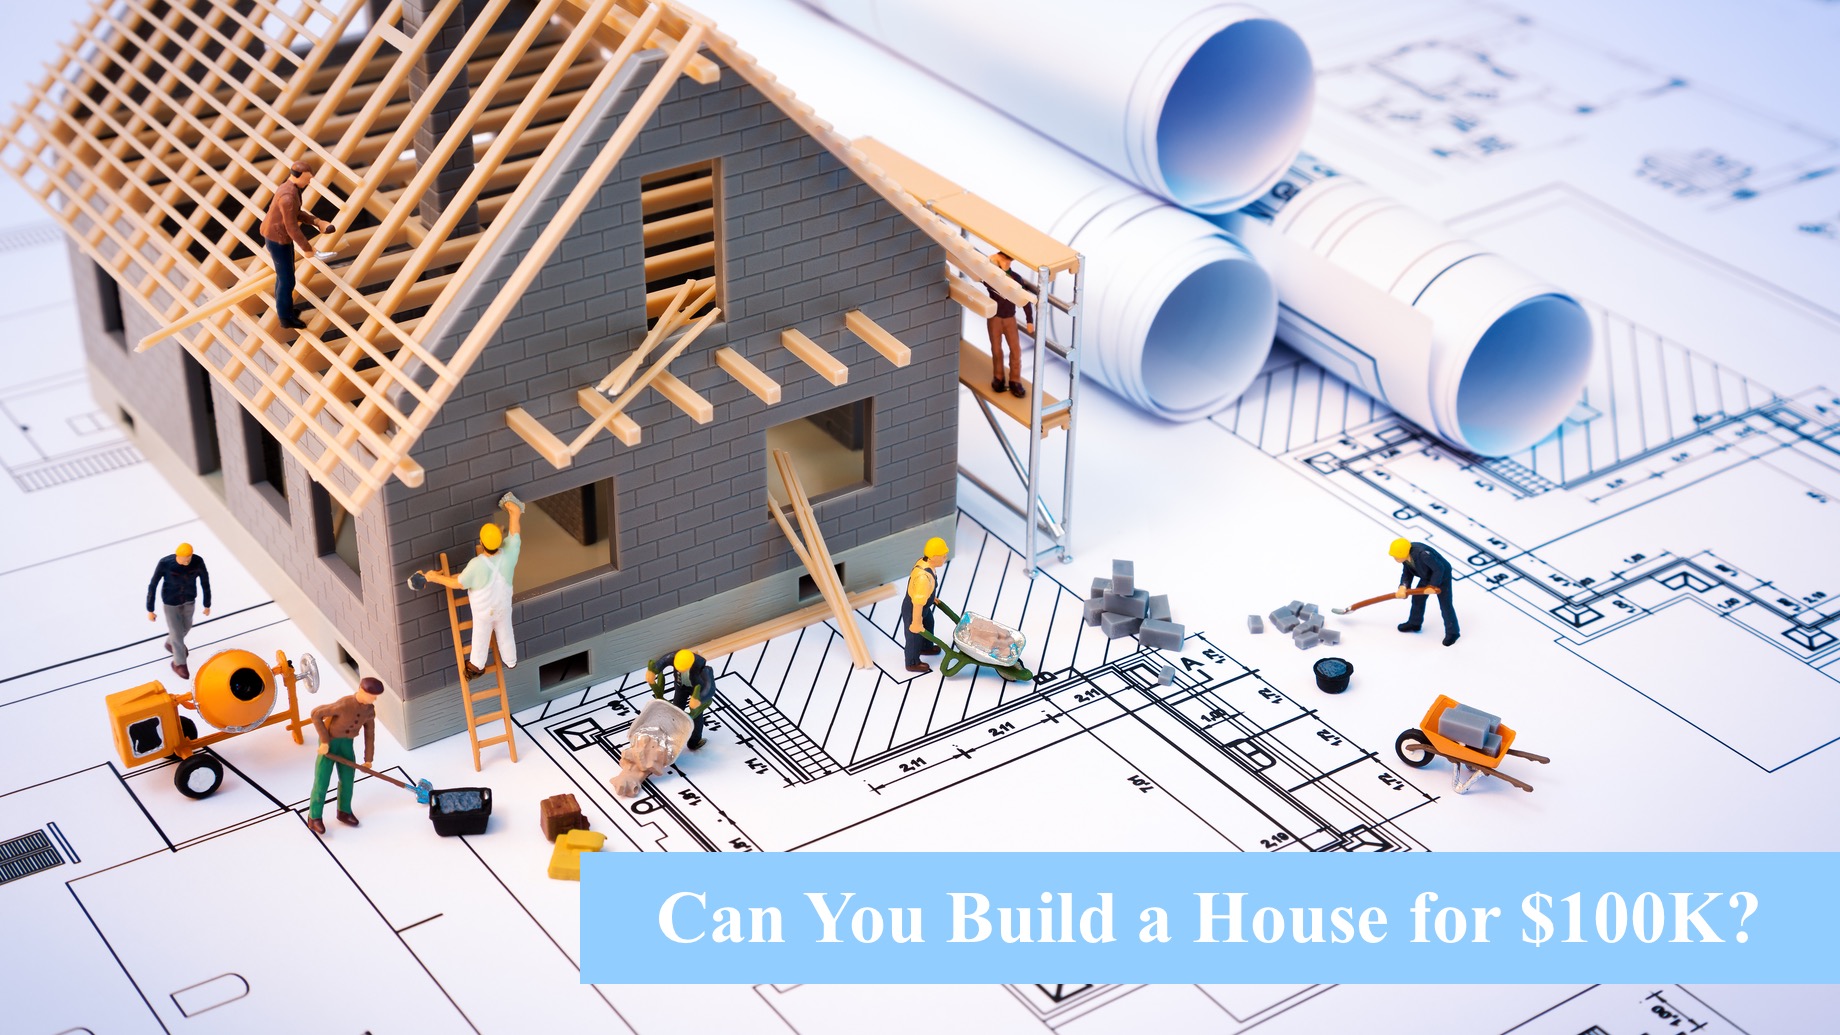 Can You Build a House for $100K?